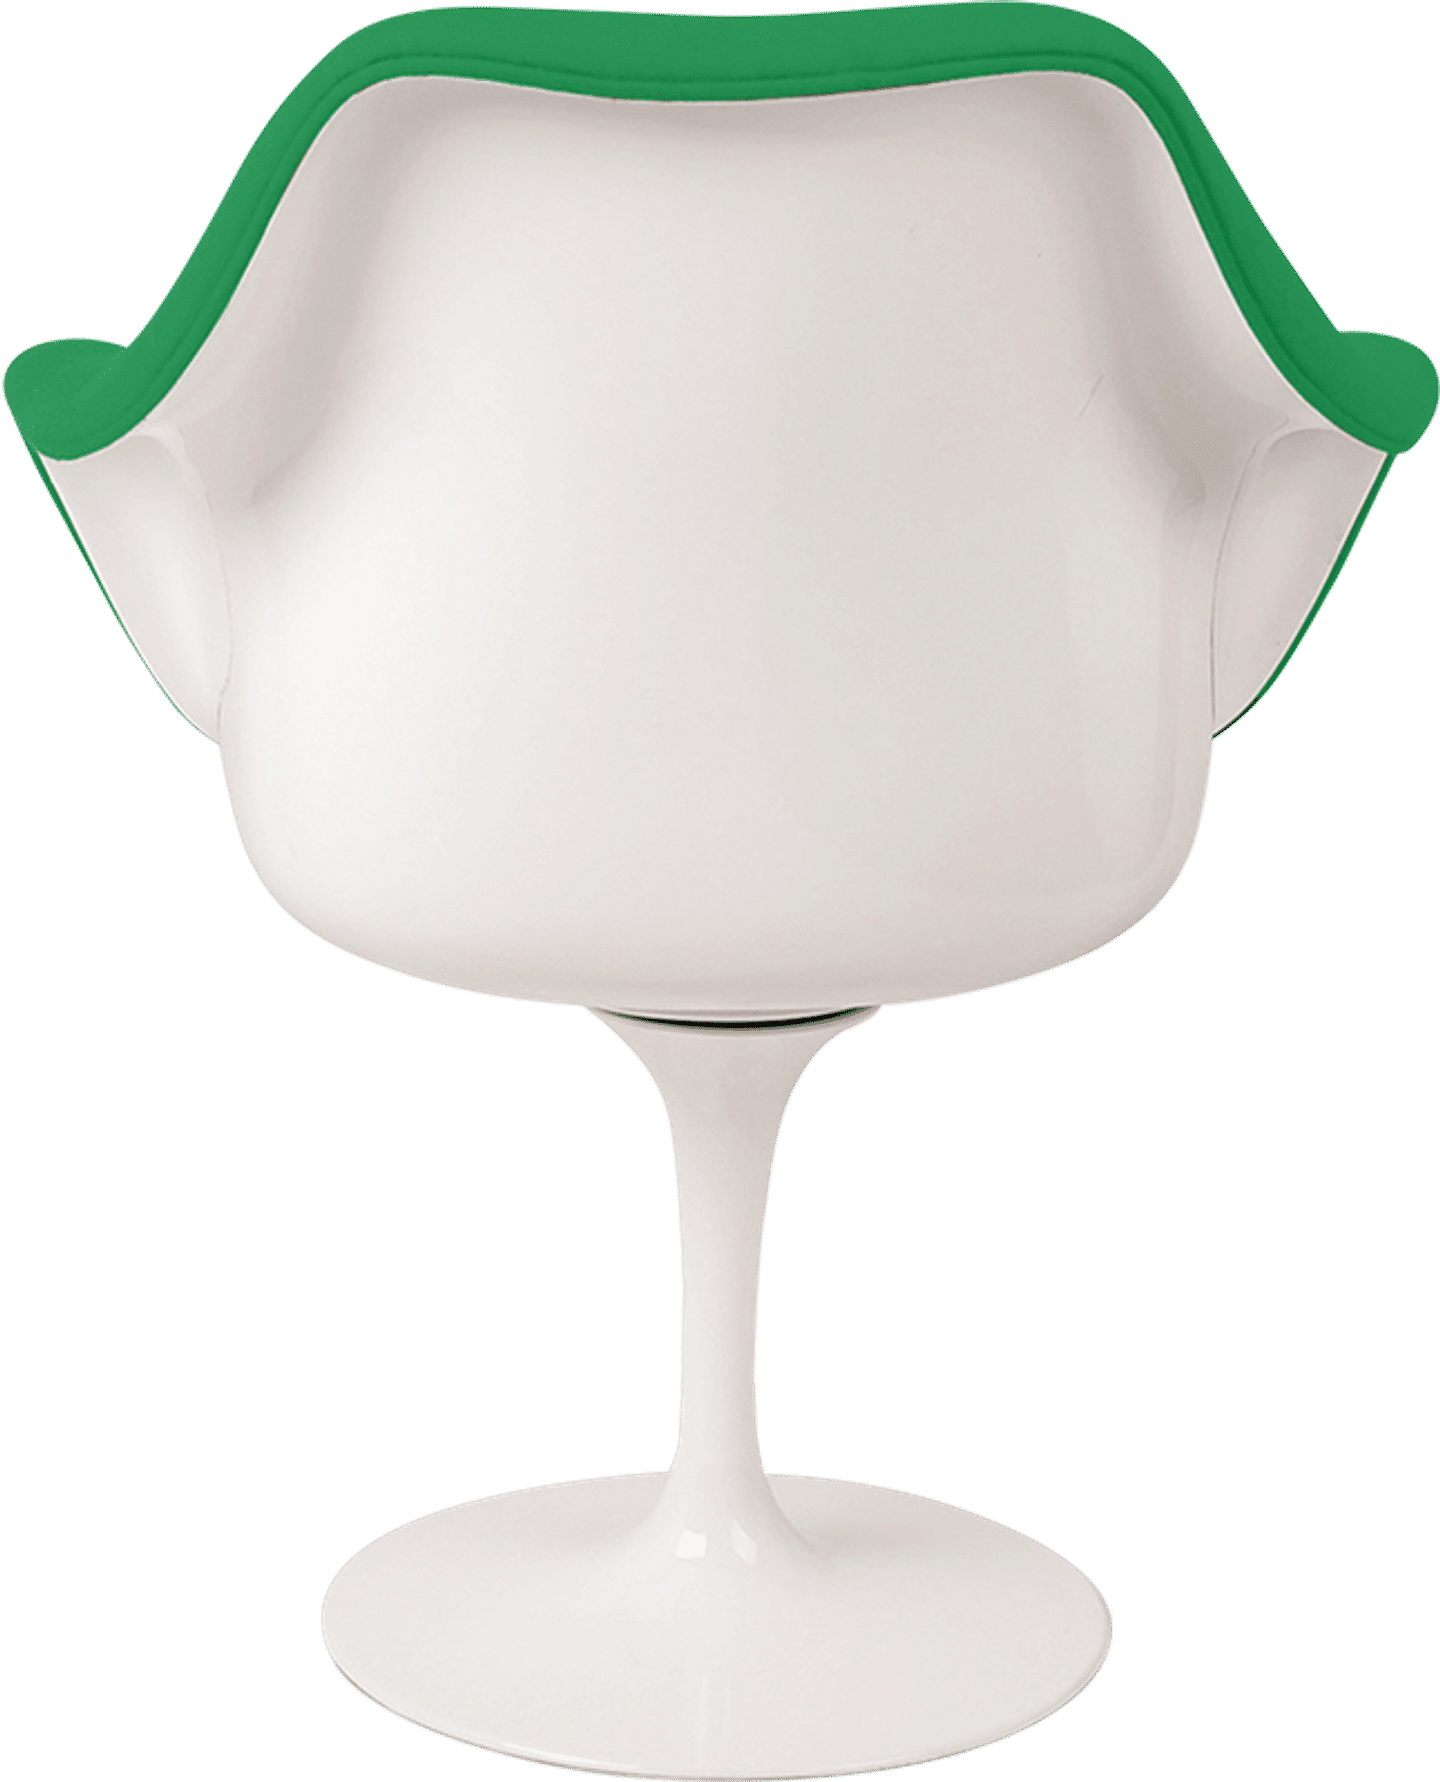 Chaise Tulip Carver Green/White image.